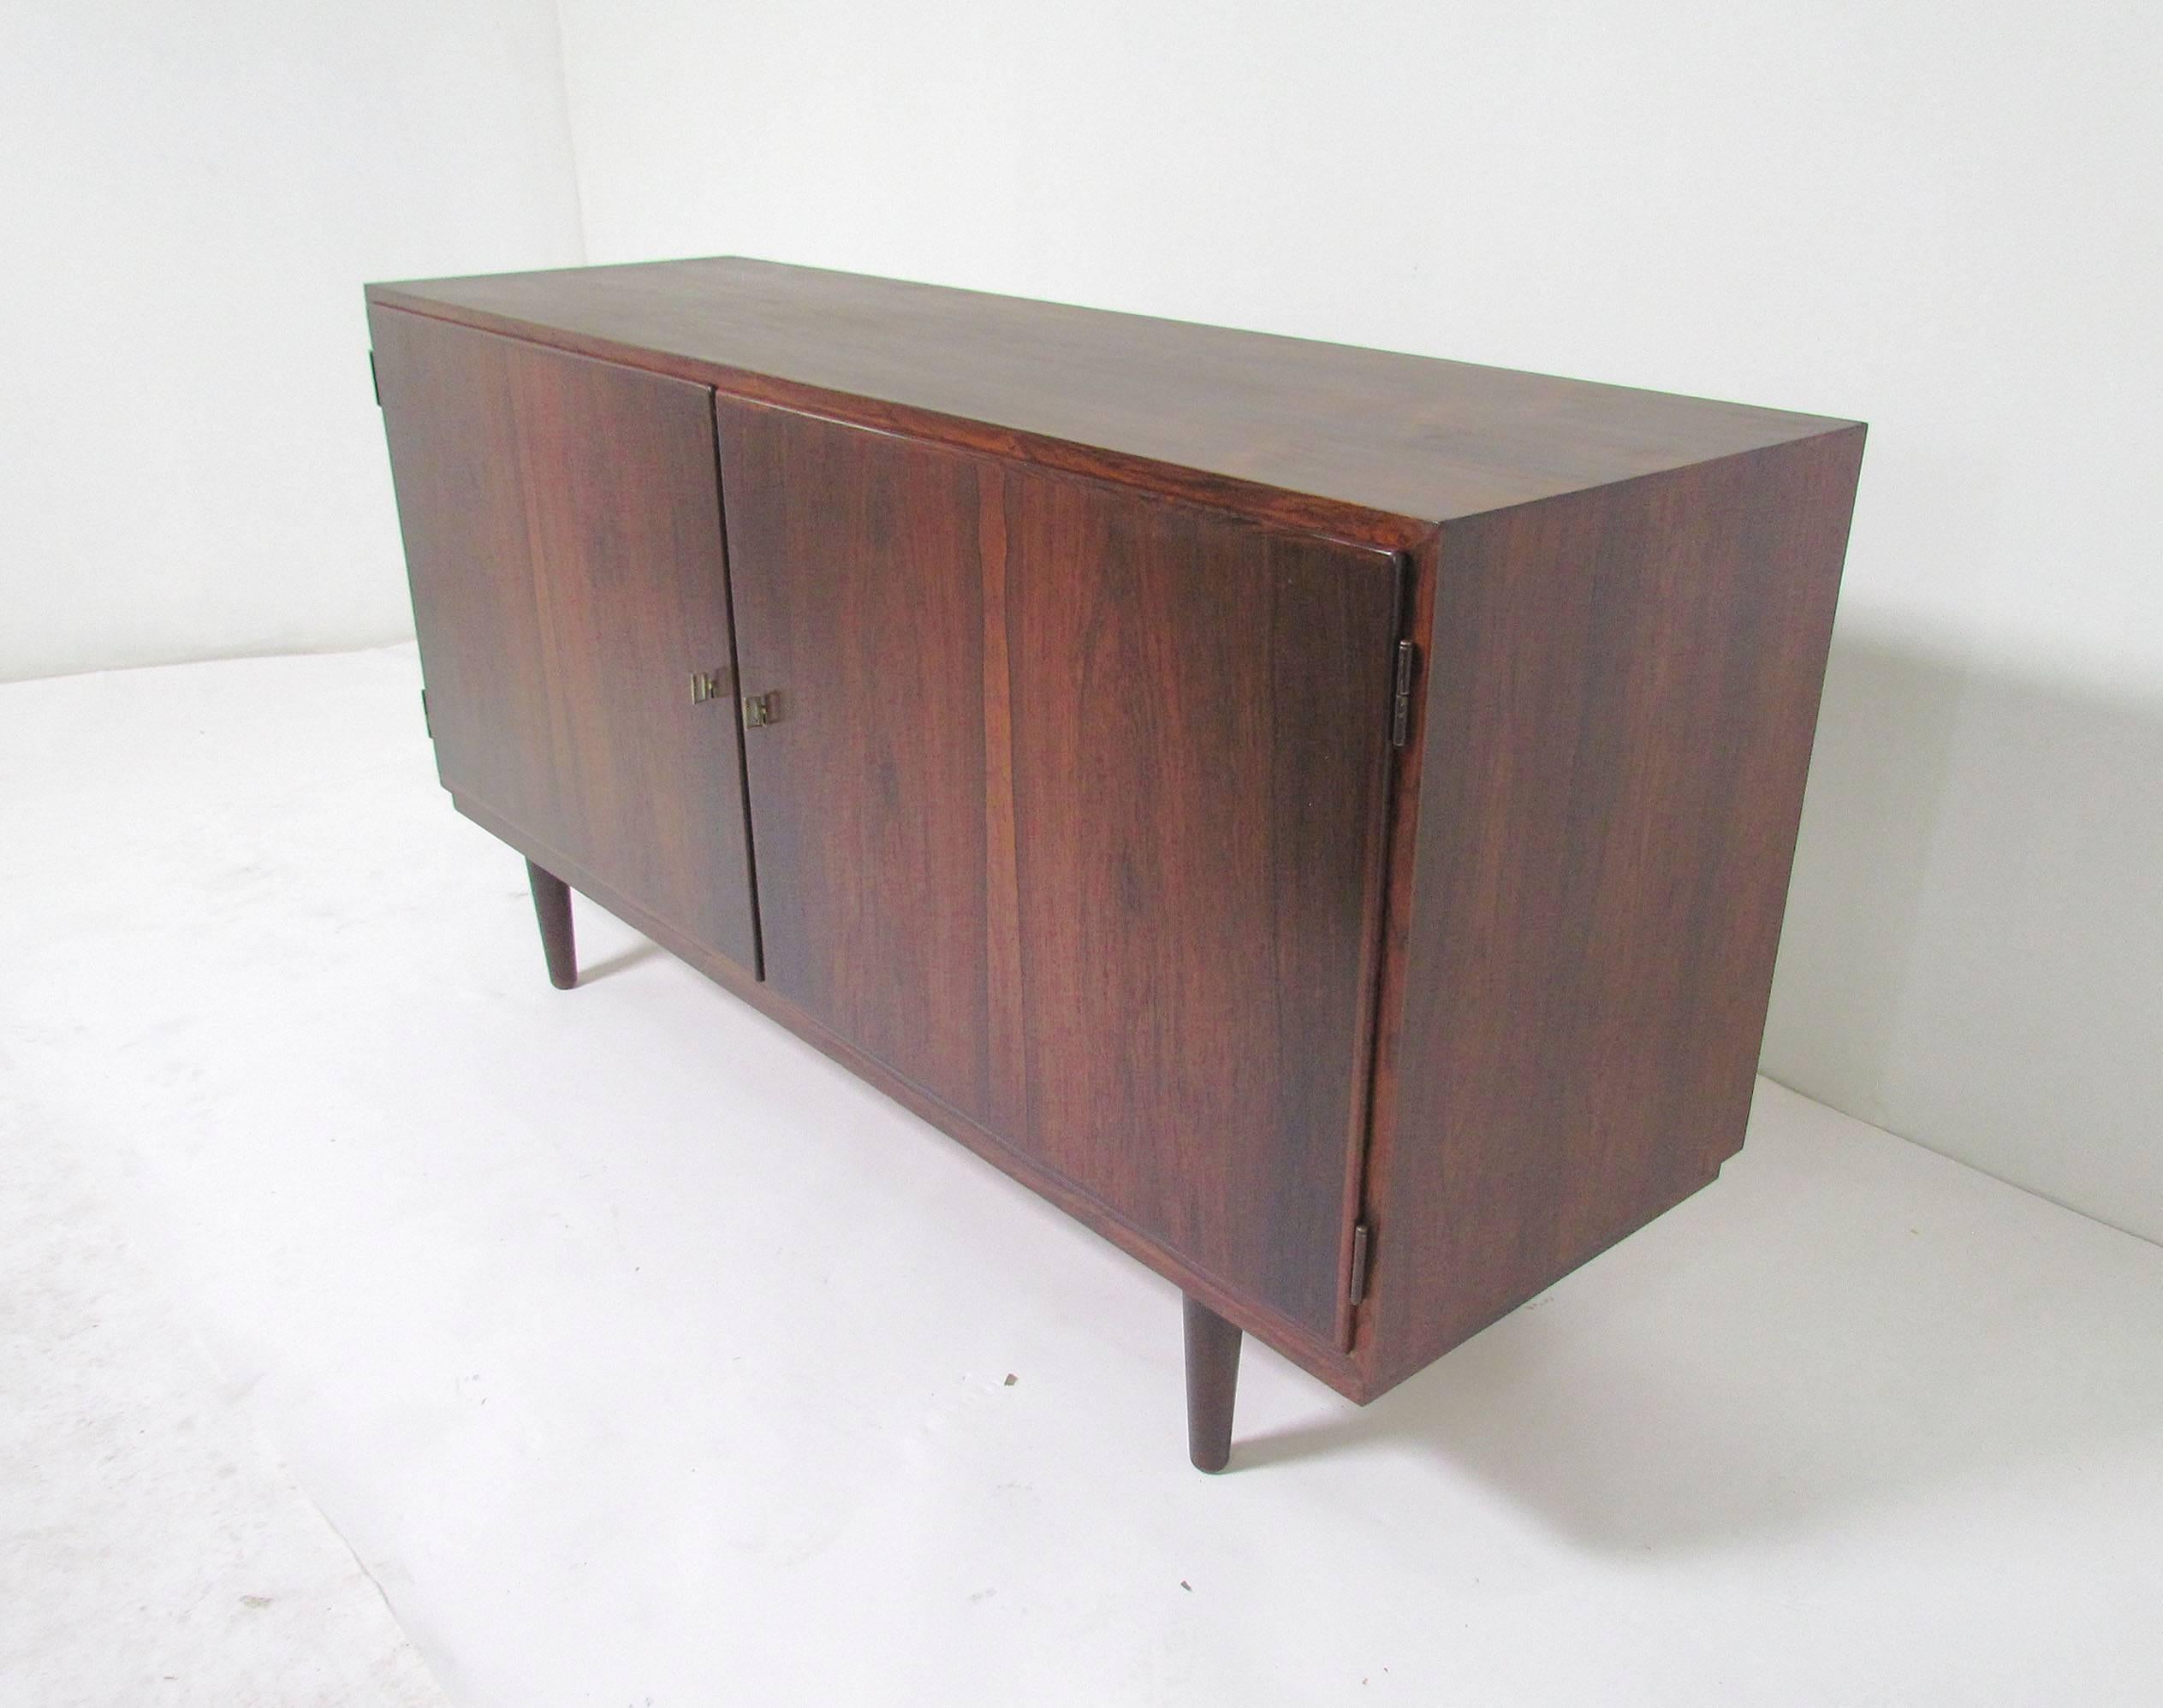 Danish rosewood sideboard designed by Carlo Jensen for Poul Hundevad, circa late 1950s. Book matched locking doors, with a key for each, open to reveal flatware drawers and storage on one side, and adjustable shelves on the other. At 54.5